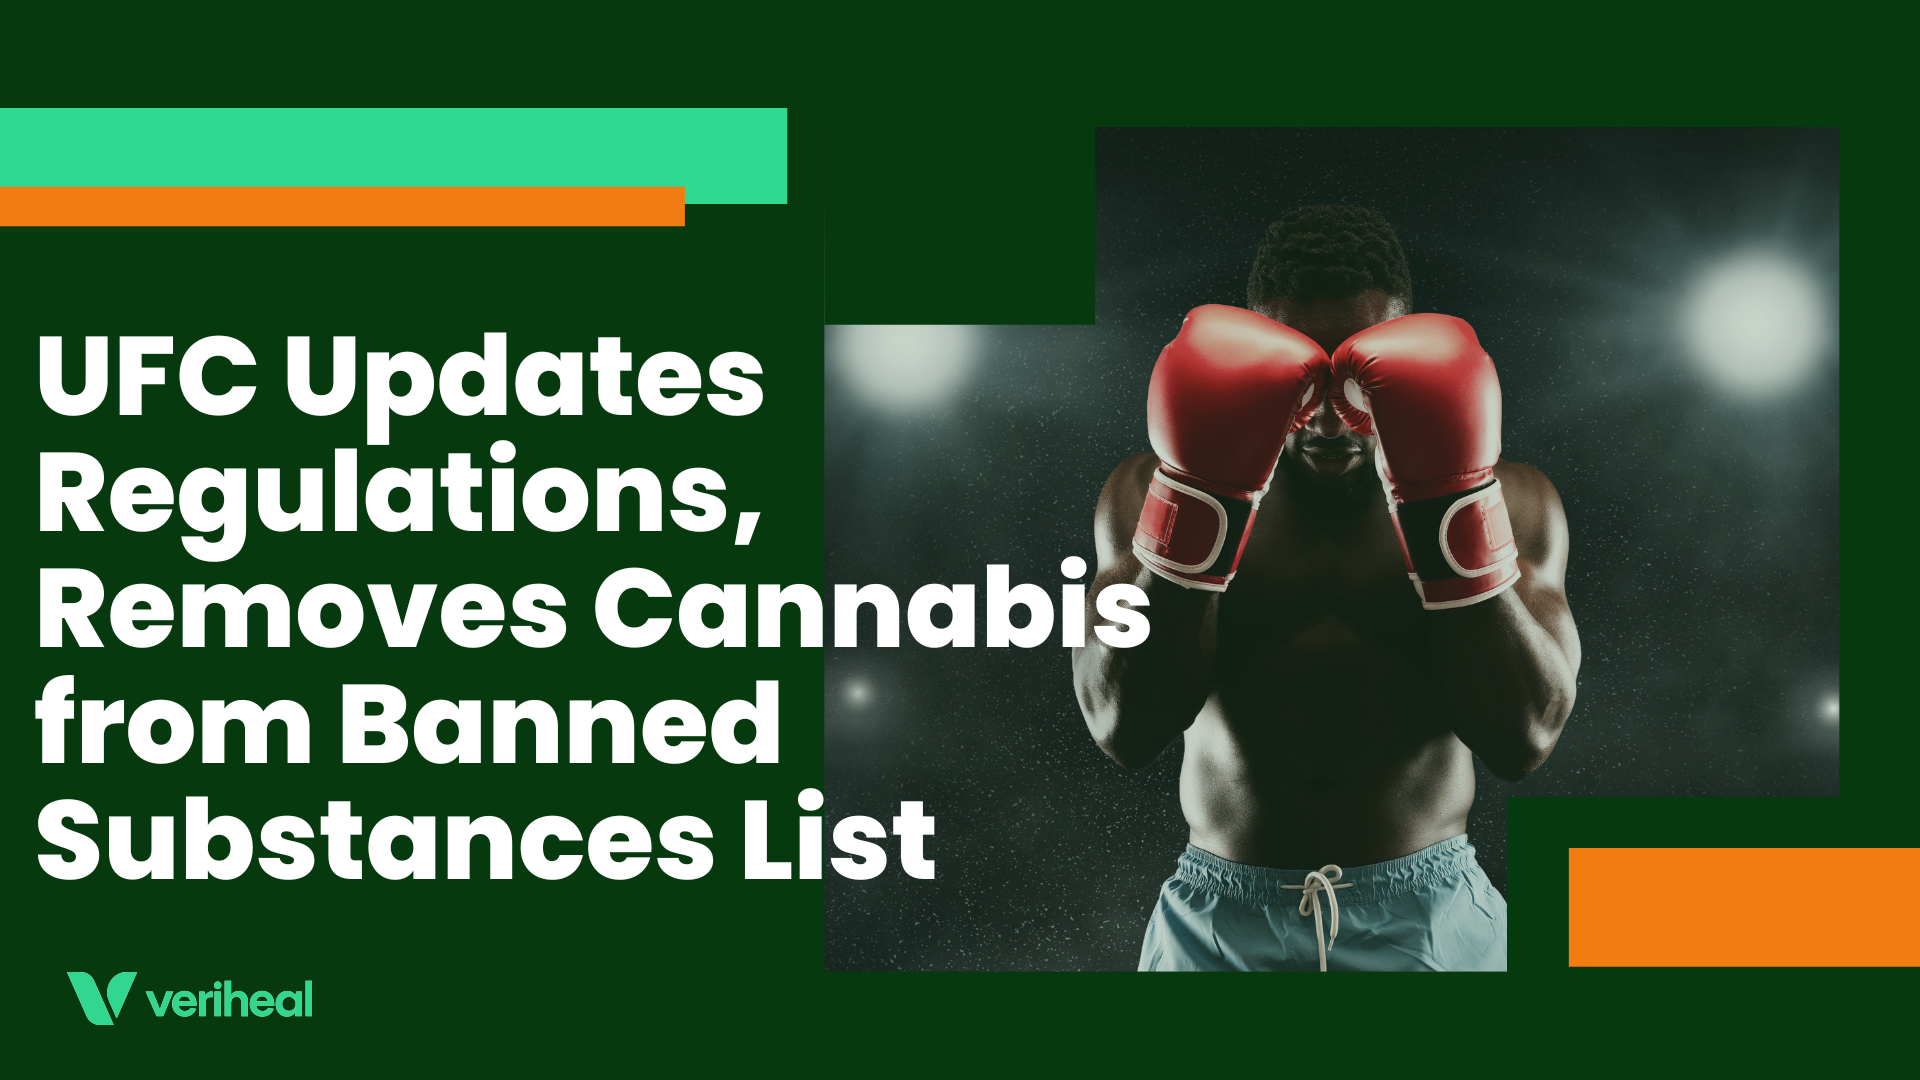 UFC Updates Regulations, Removes Cannabis from Banned Substances List